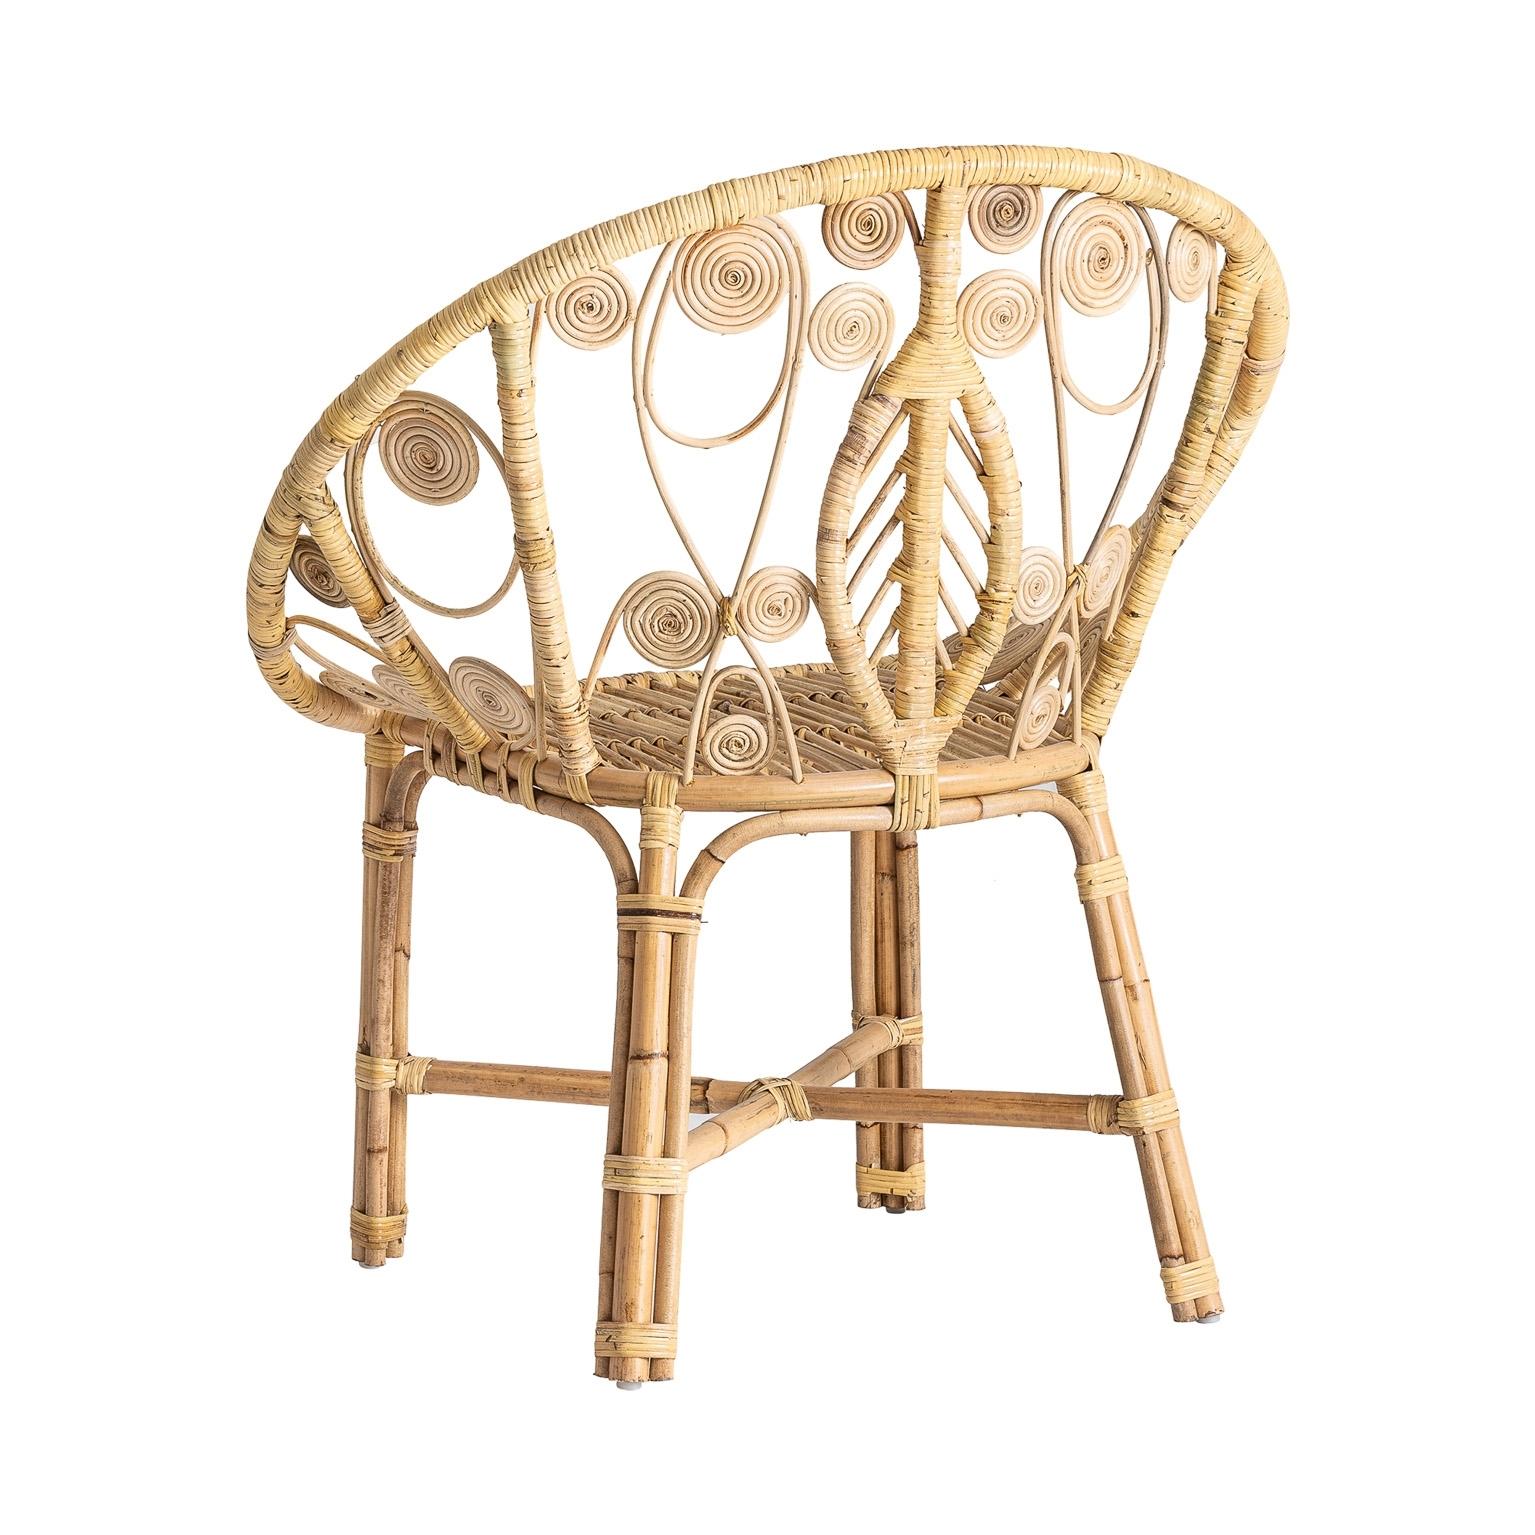 Sculptural and gorgeous rattan and wicker peacock design armchair. Vintage style with a Bohemian chic look!